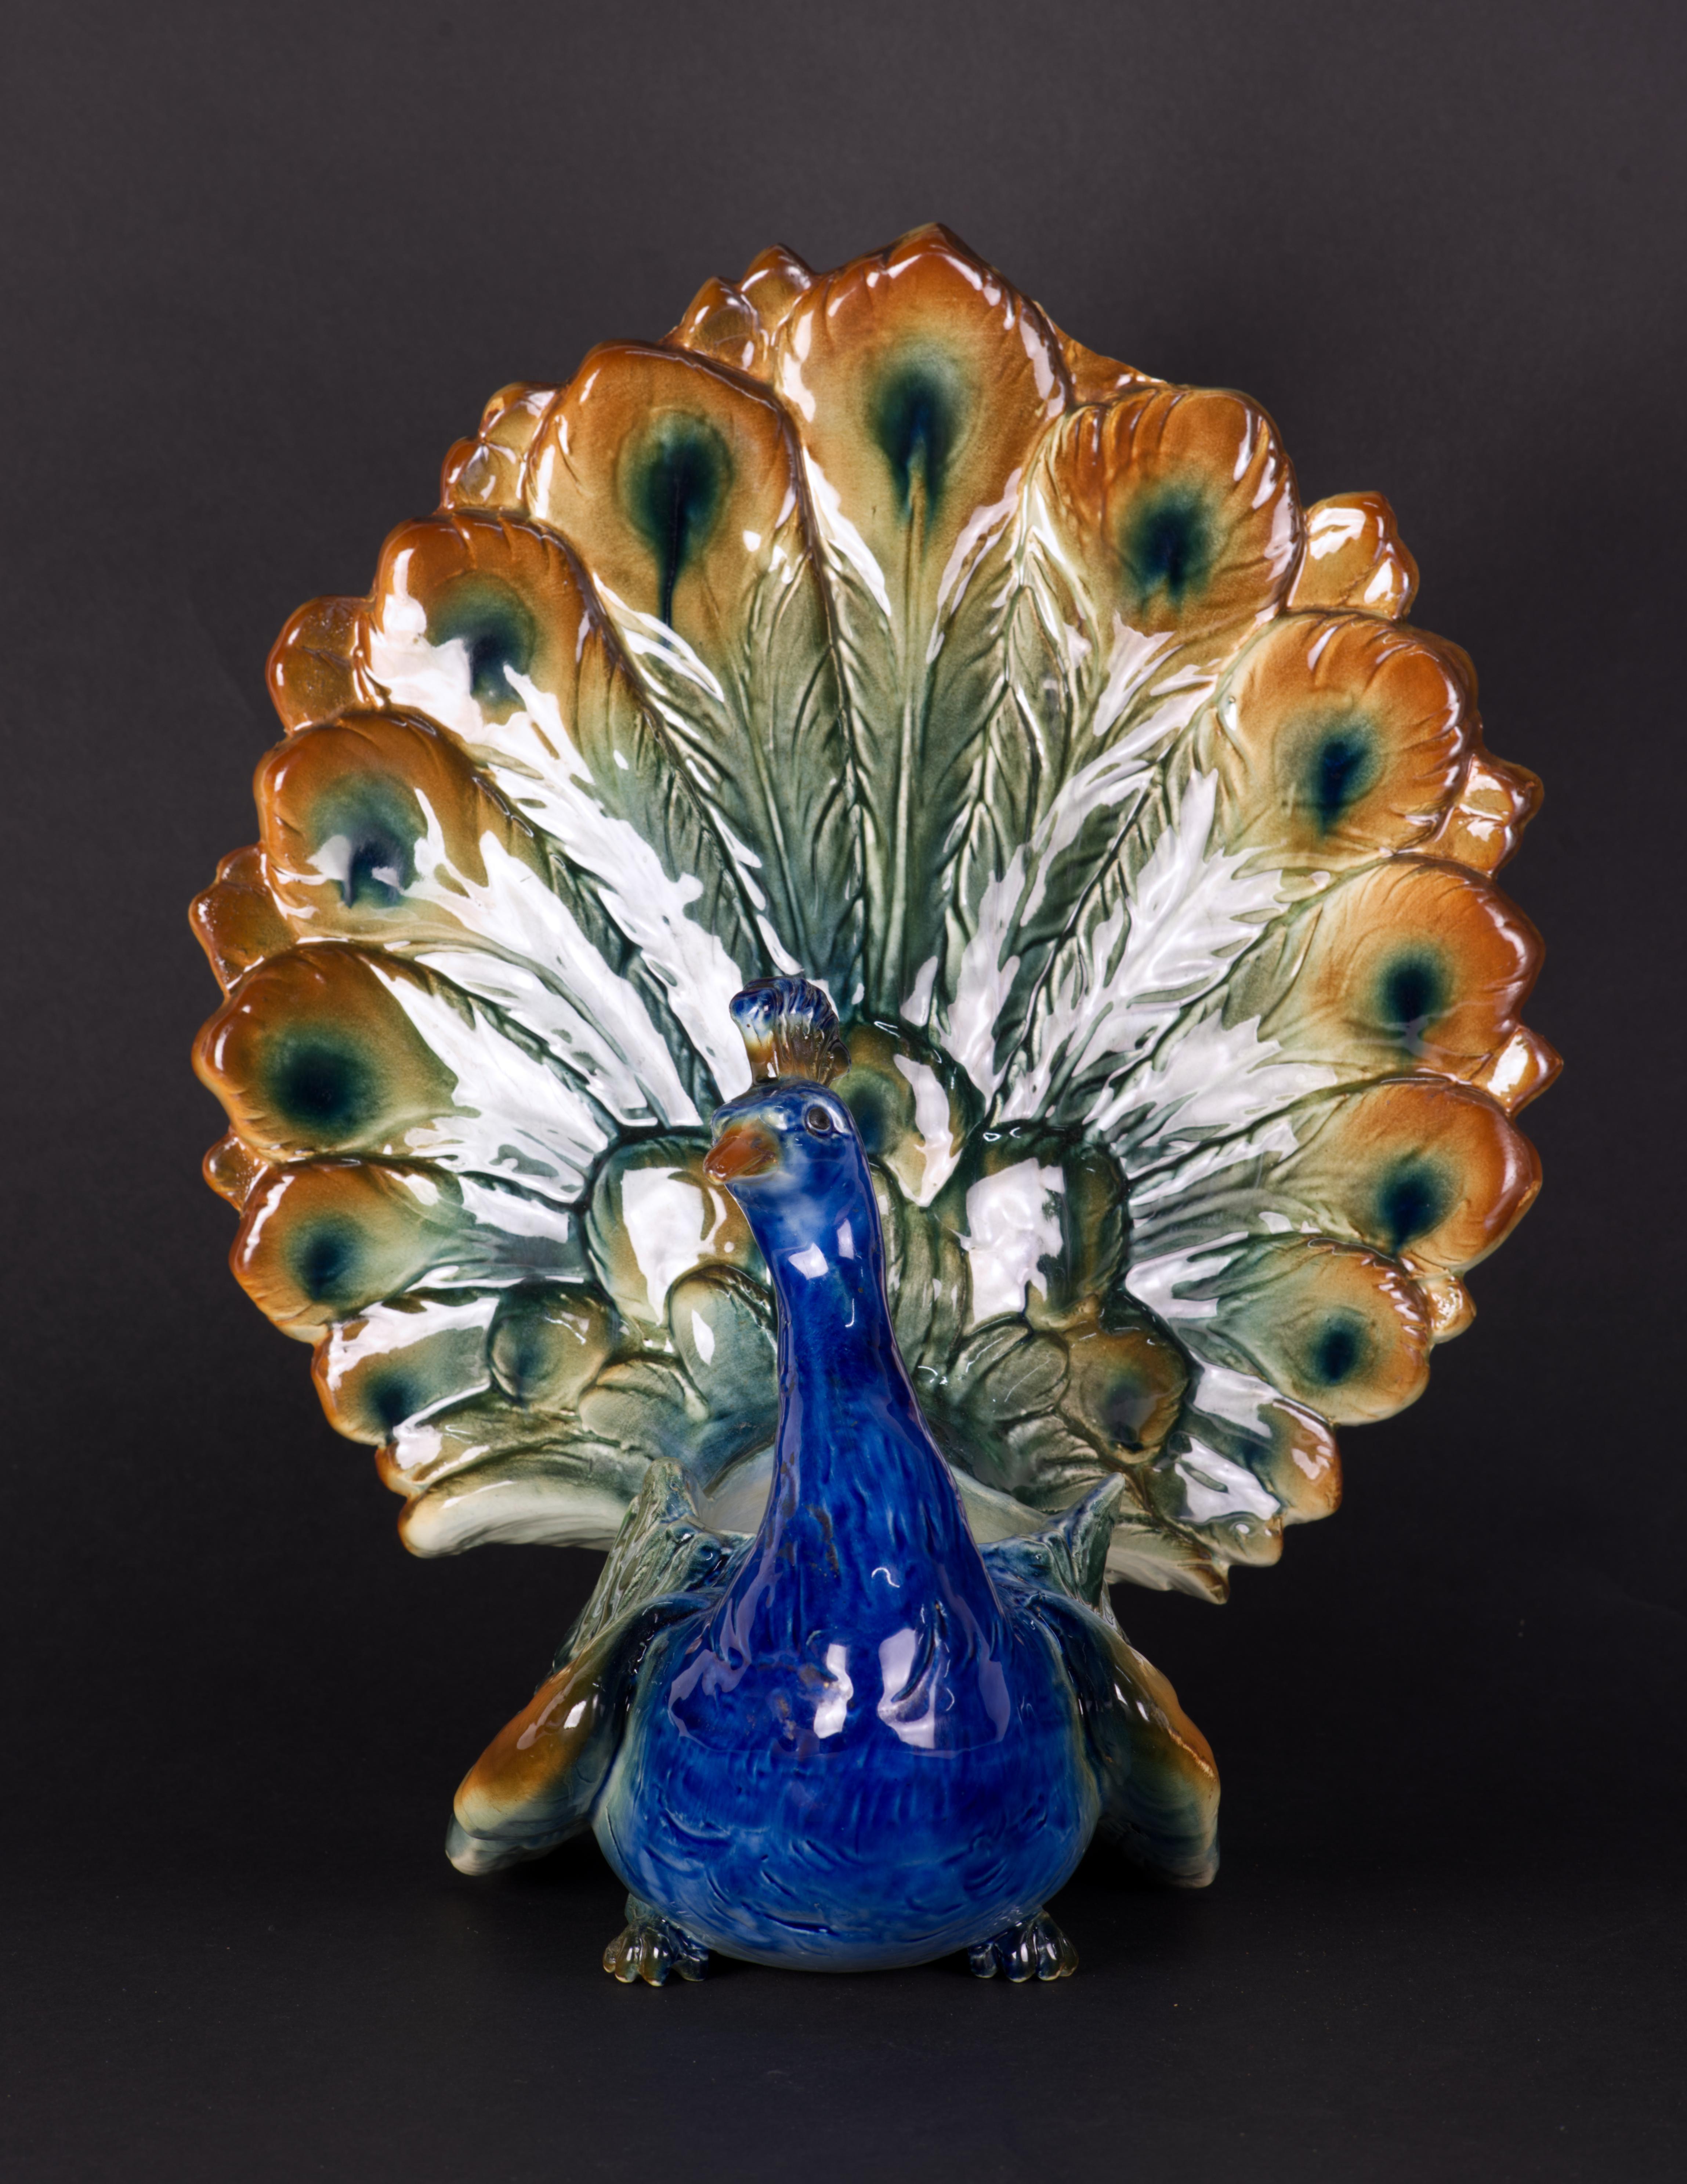  Rare majolica peacock shaped jardiniere or planter in Art Deco style was made by St Clement in Luneville, France. The figural planter features richly detailed surfaces, especially on tail and wing feathers, that are enhanced by hand-painted decor